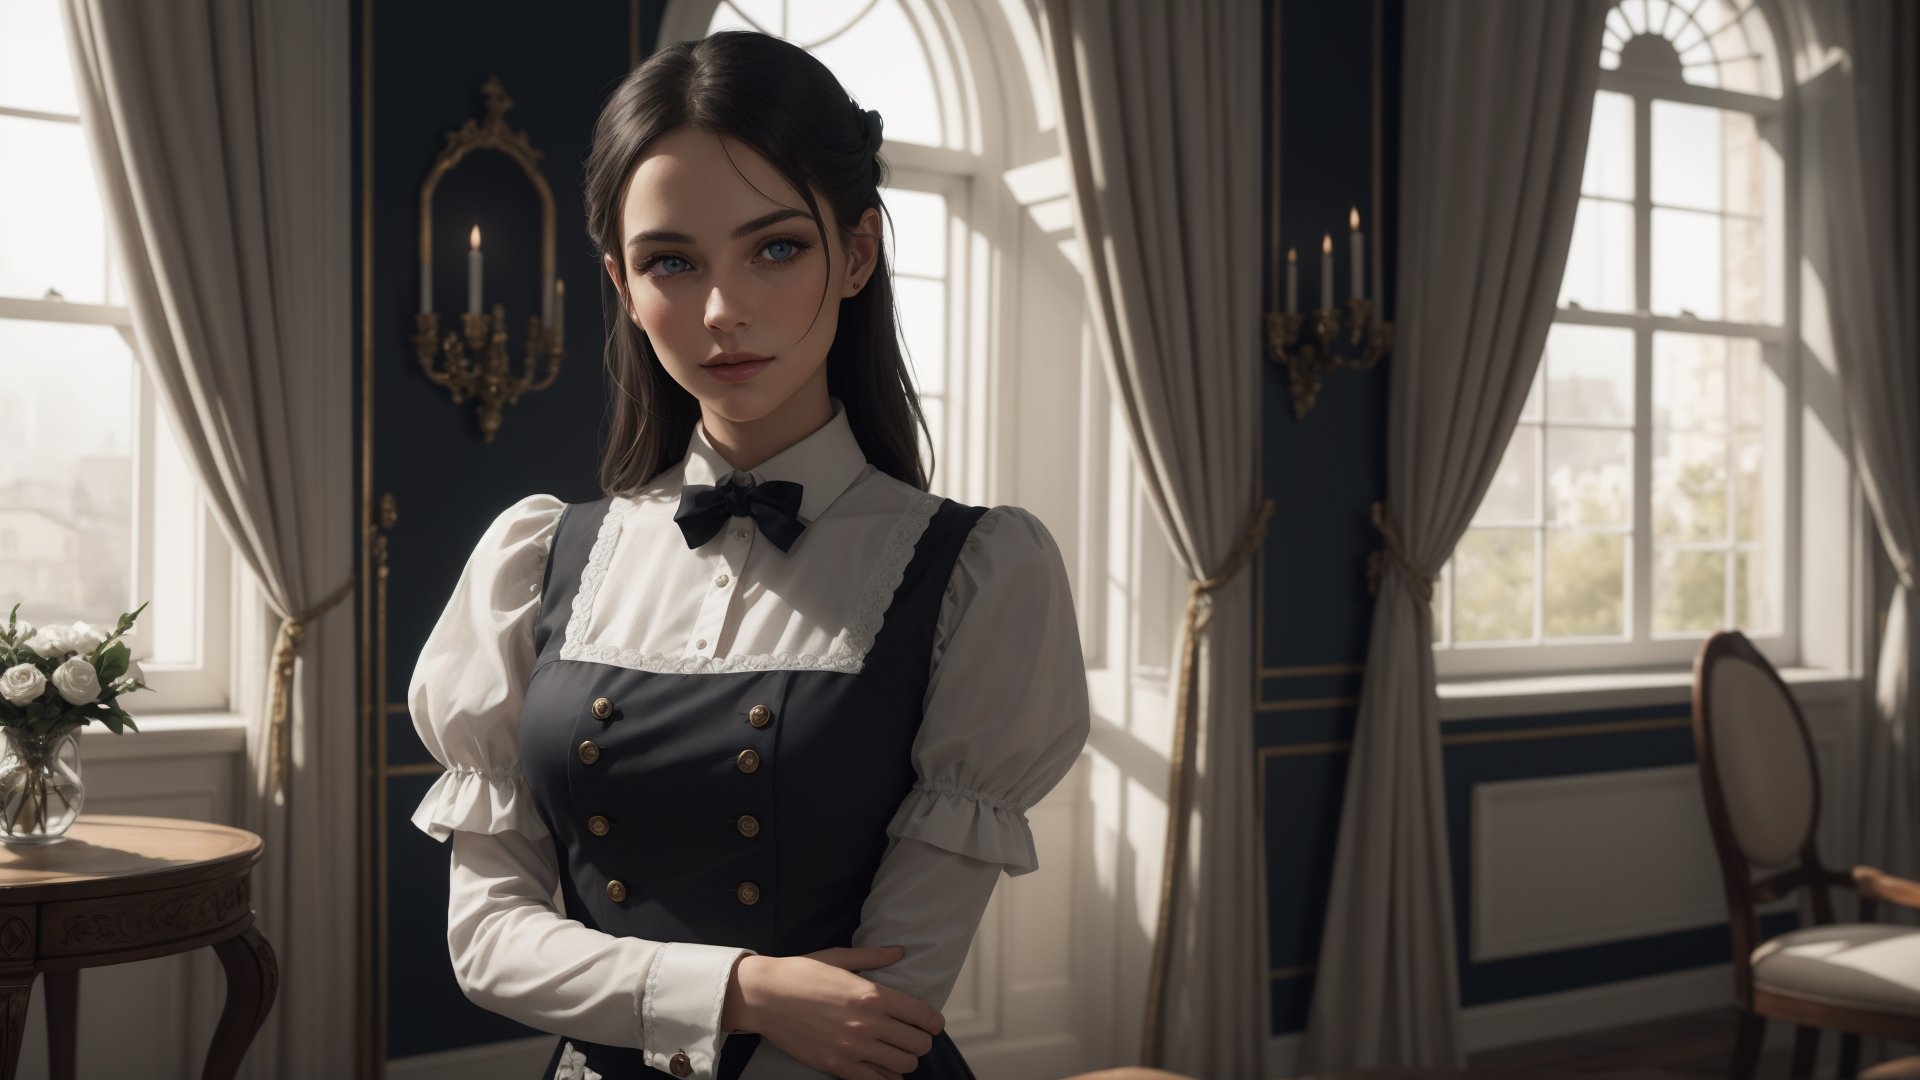 Generate a high-quality, intricate illustration of a British maid in a mansion scene. She should be portrayed in a full-body shot, wearing a maid uniform. The character should have black hair, blue eyes with a realistic quality, and make eye contact with a sultry pose. The expression should convey innocence. Please emphasize the details in the eyes. The overall artwork should have a contrast that enhances the mood. Limit the scene to include only one female character.